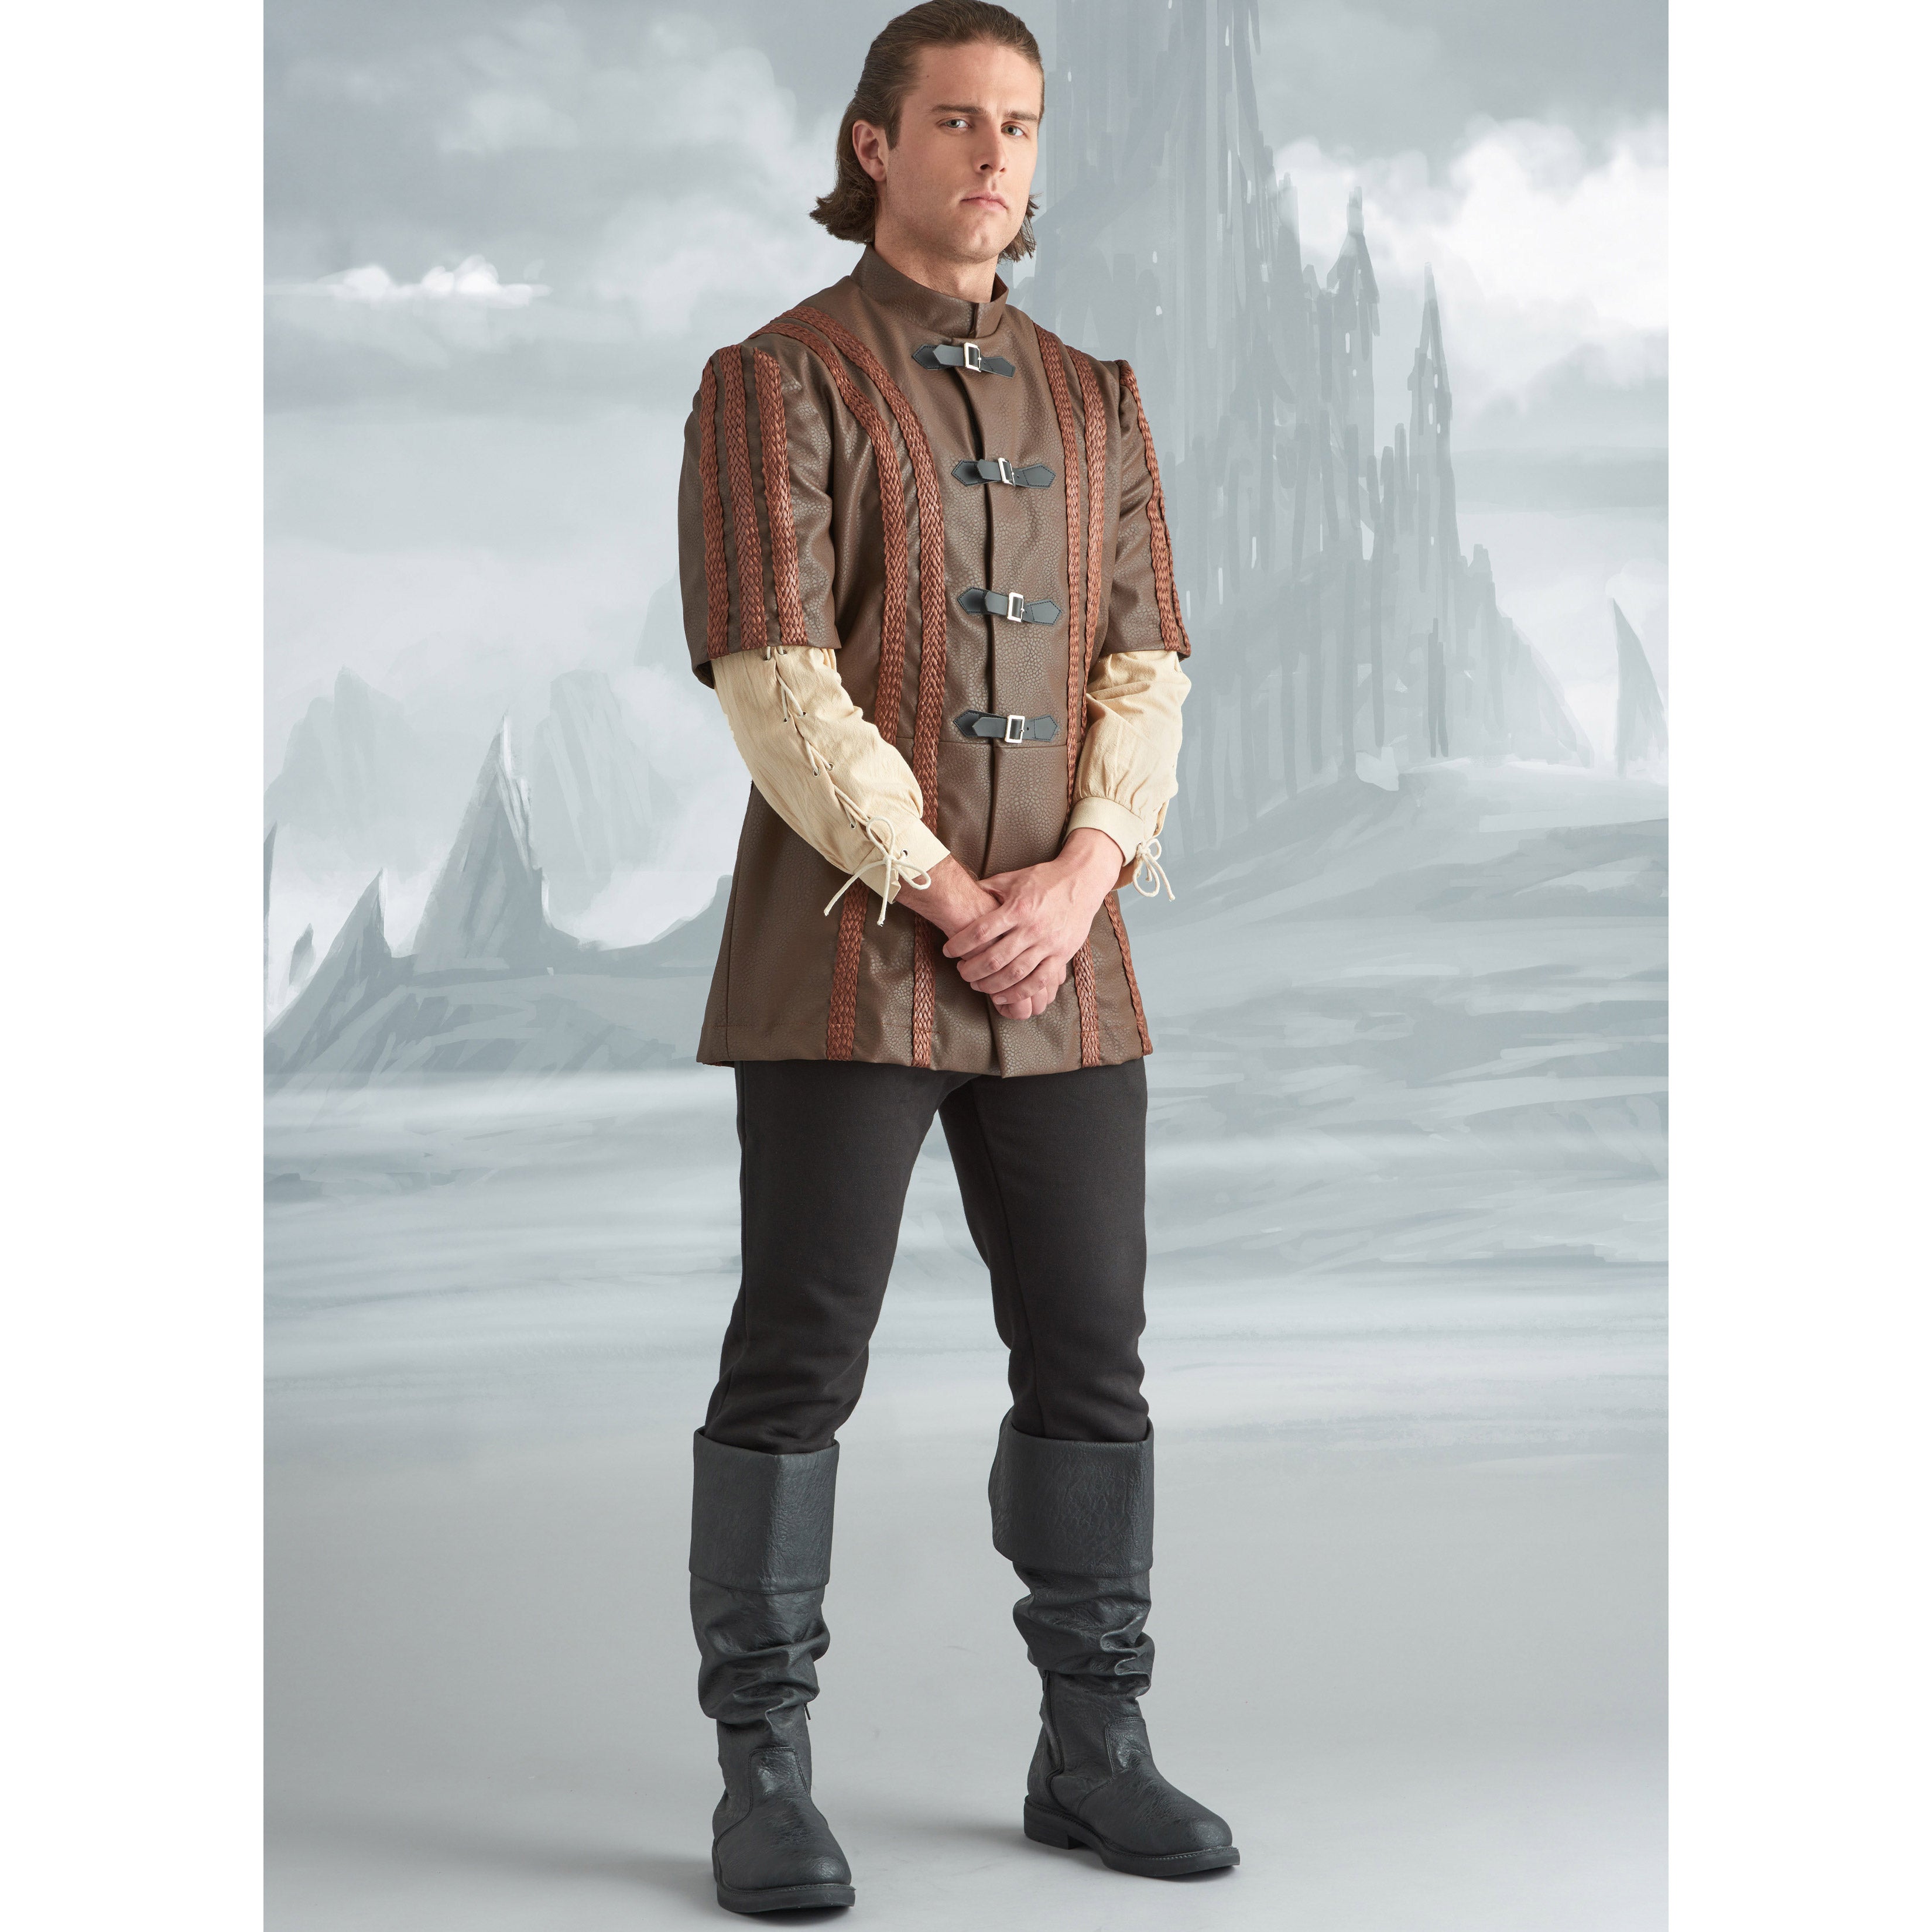 Simplicity Sewing Pattern 9593 Men's Medieval fantasy costumes from Jaycotts Sewing Supplies